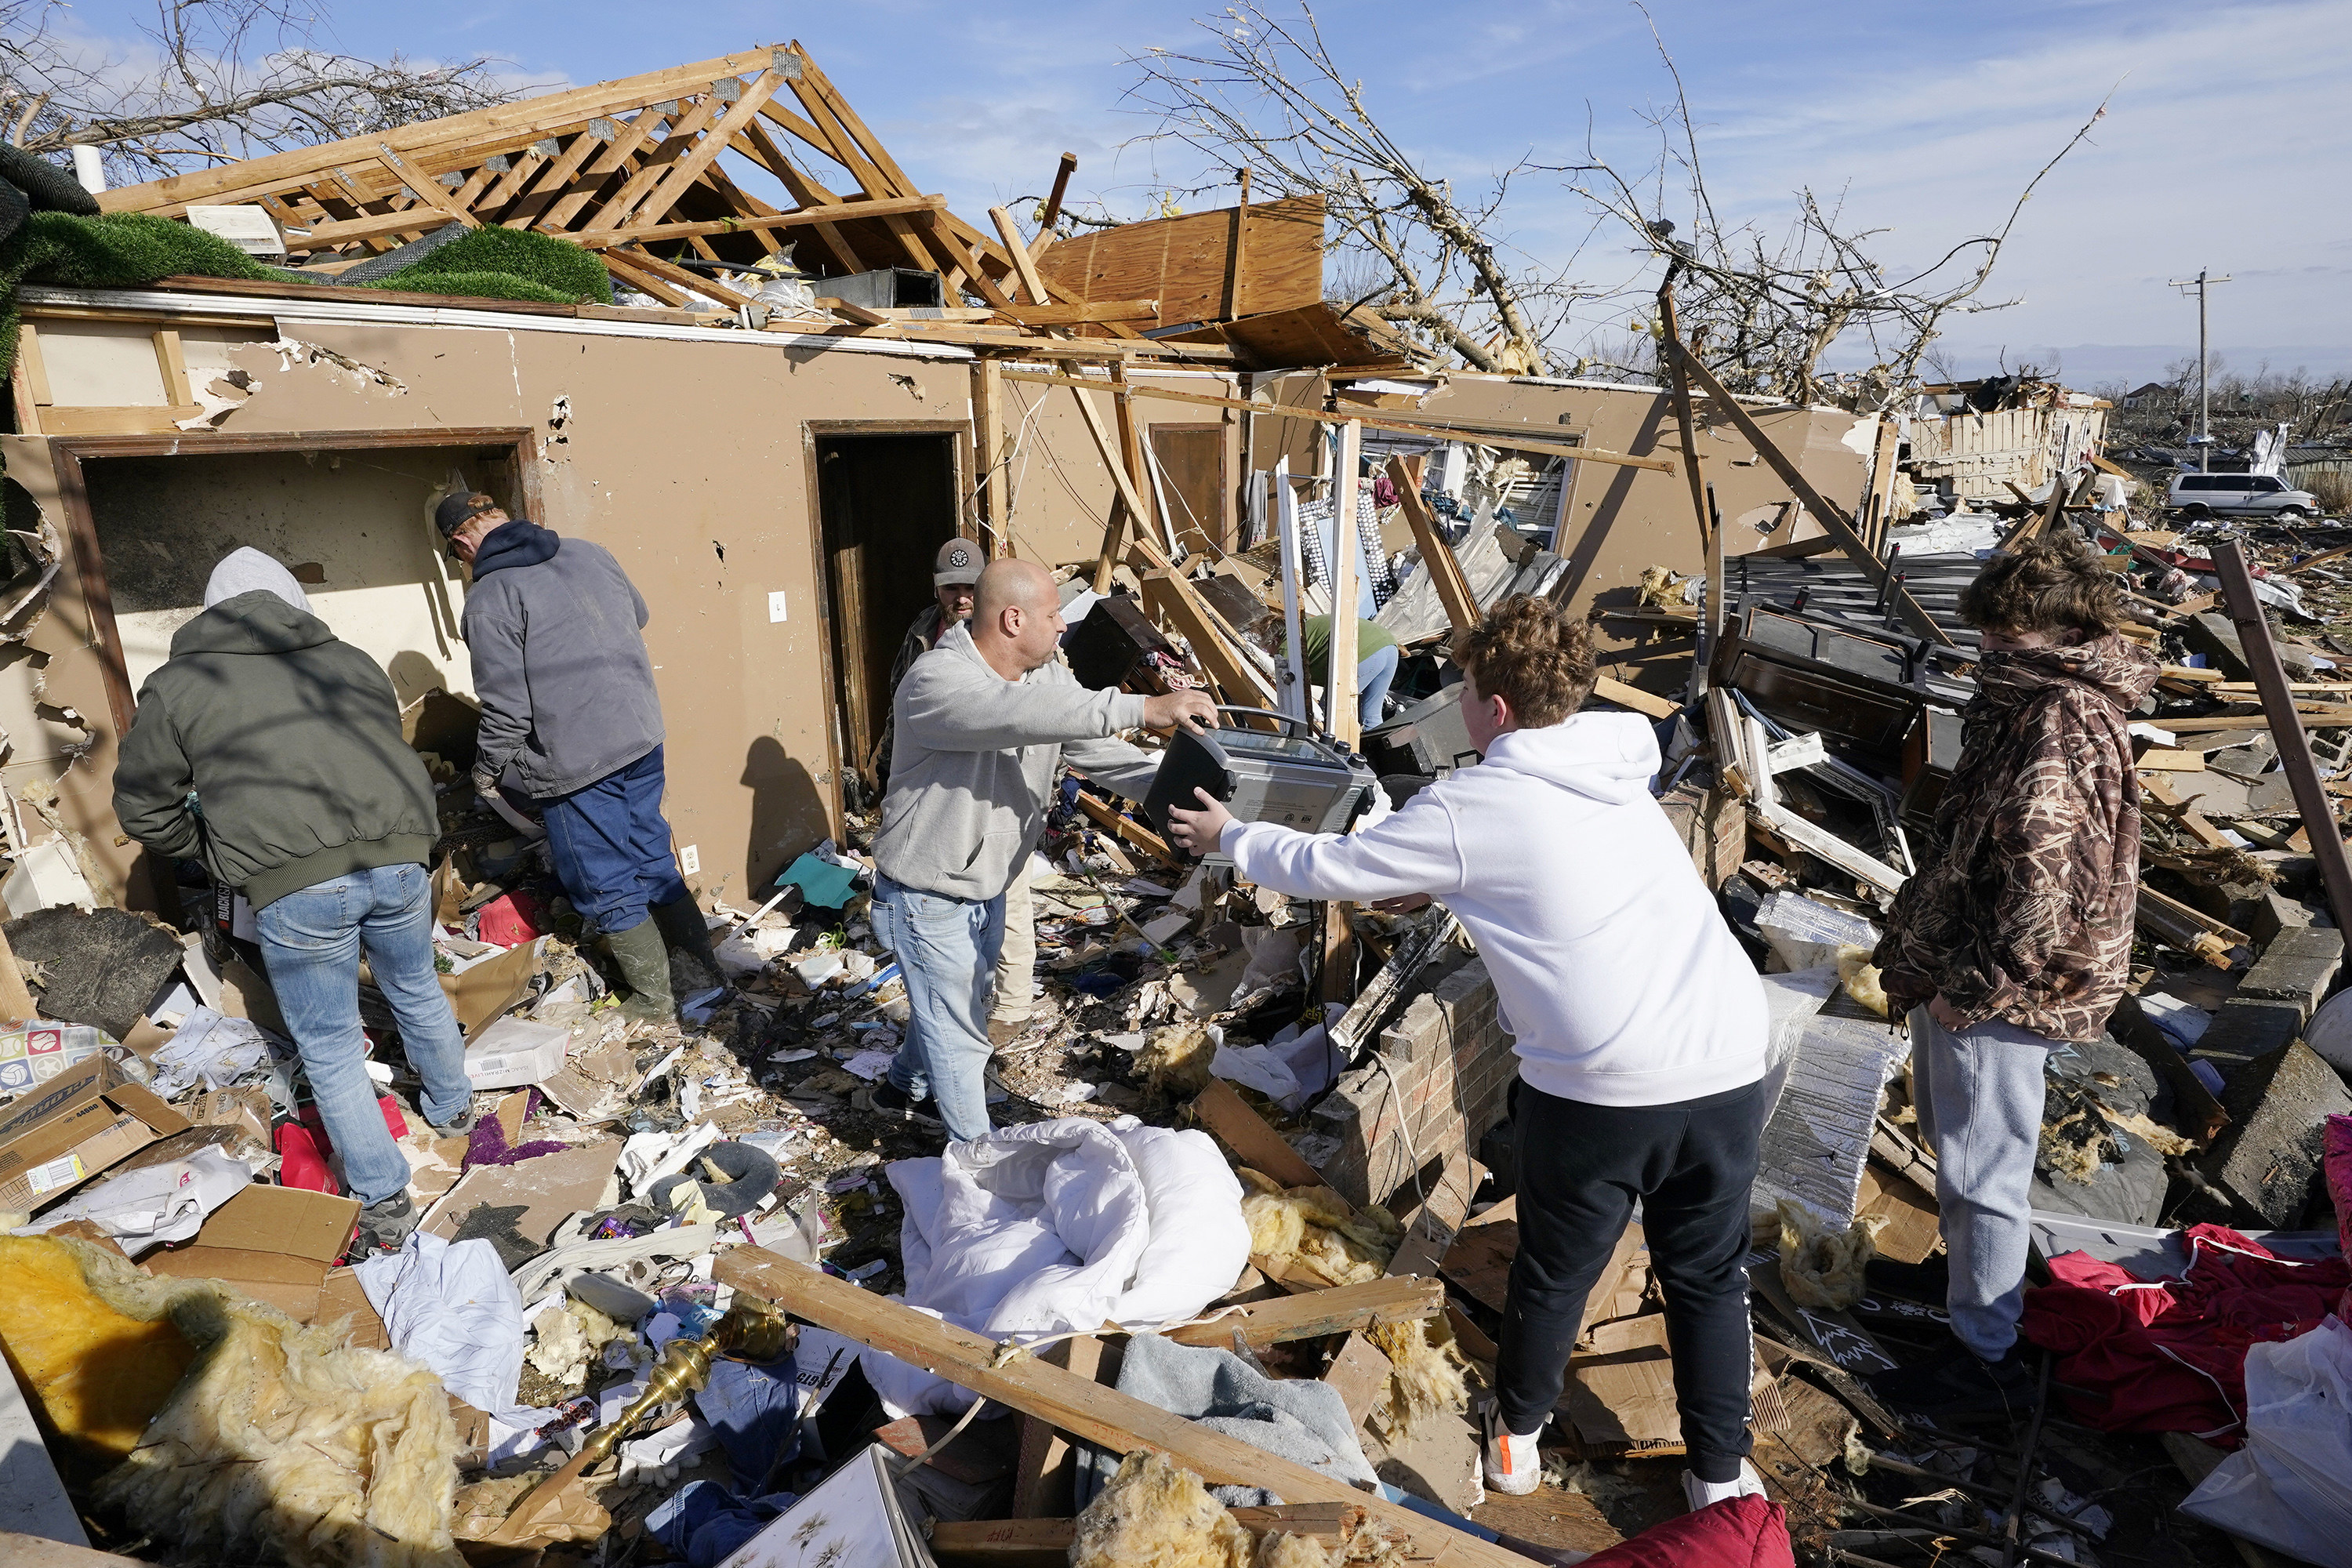 A group of people helping to pass items over debris at a destroyed house 